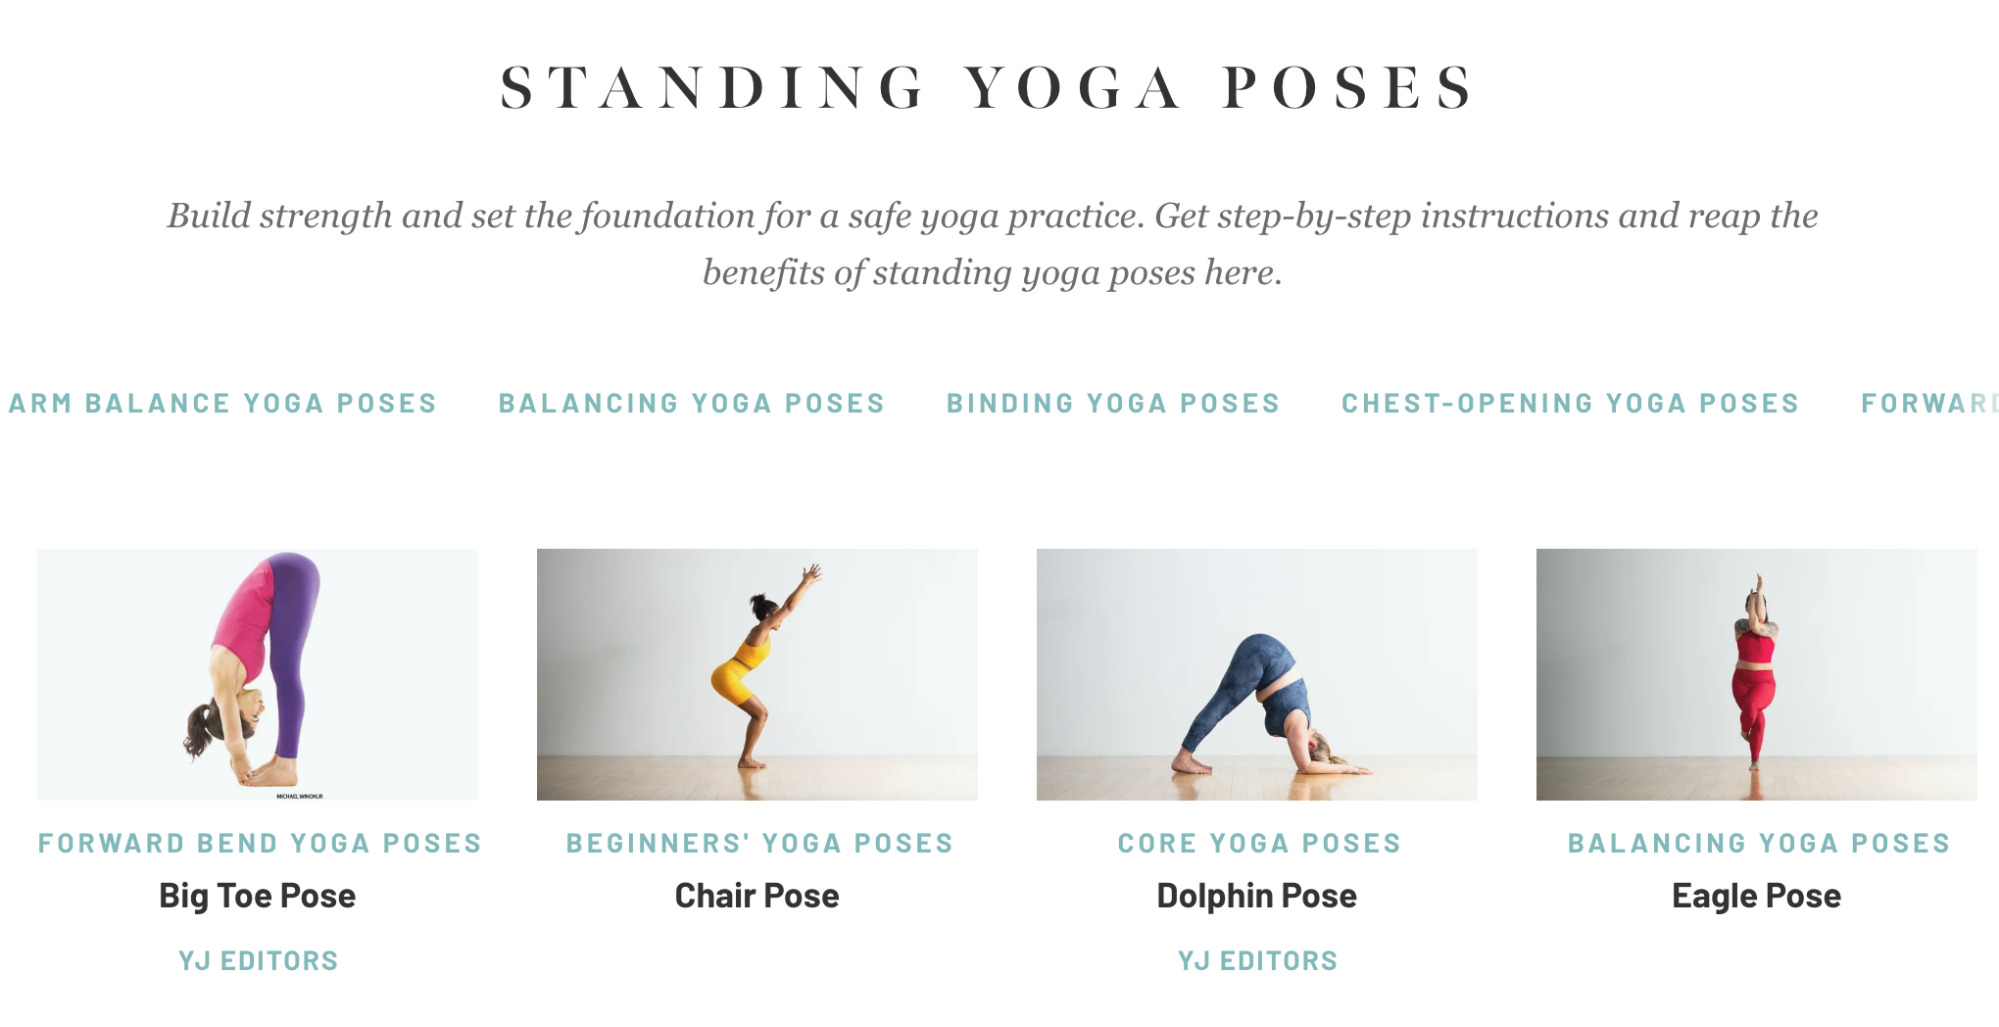 Examples of standing yoga poses (in grid format)
